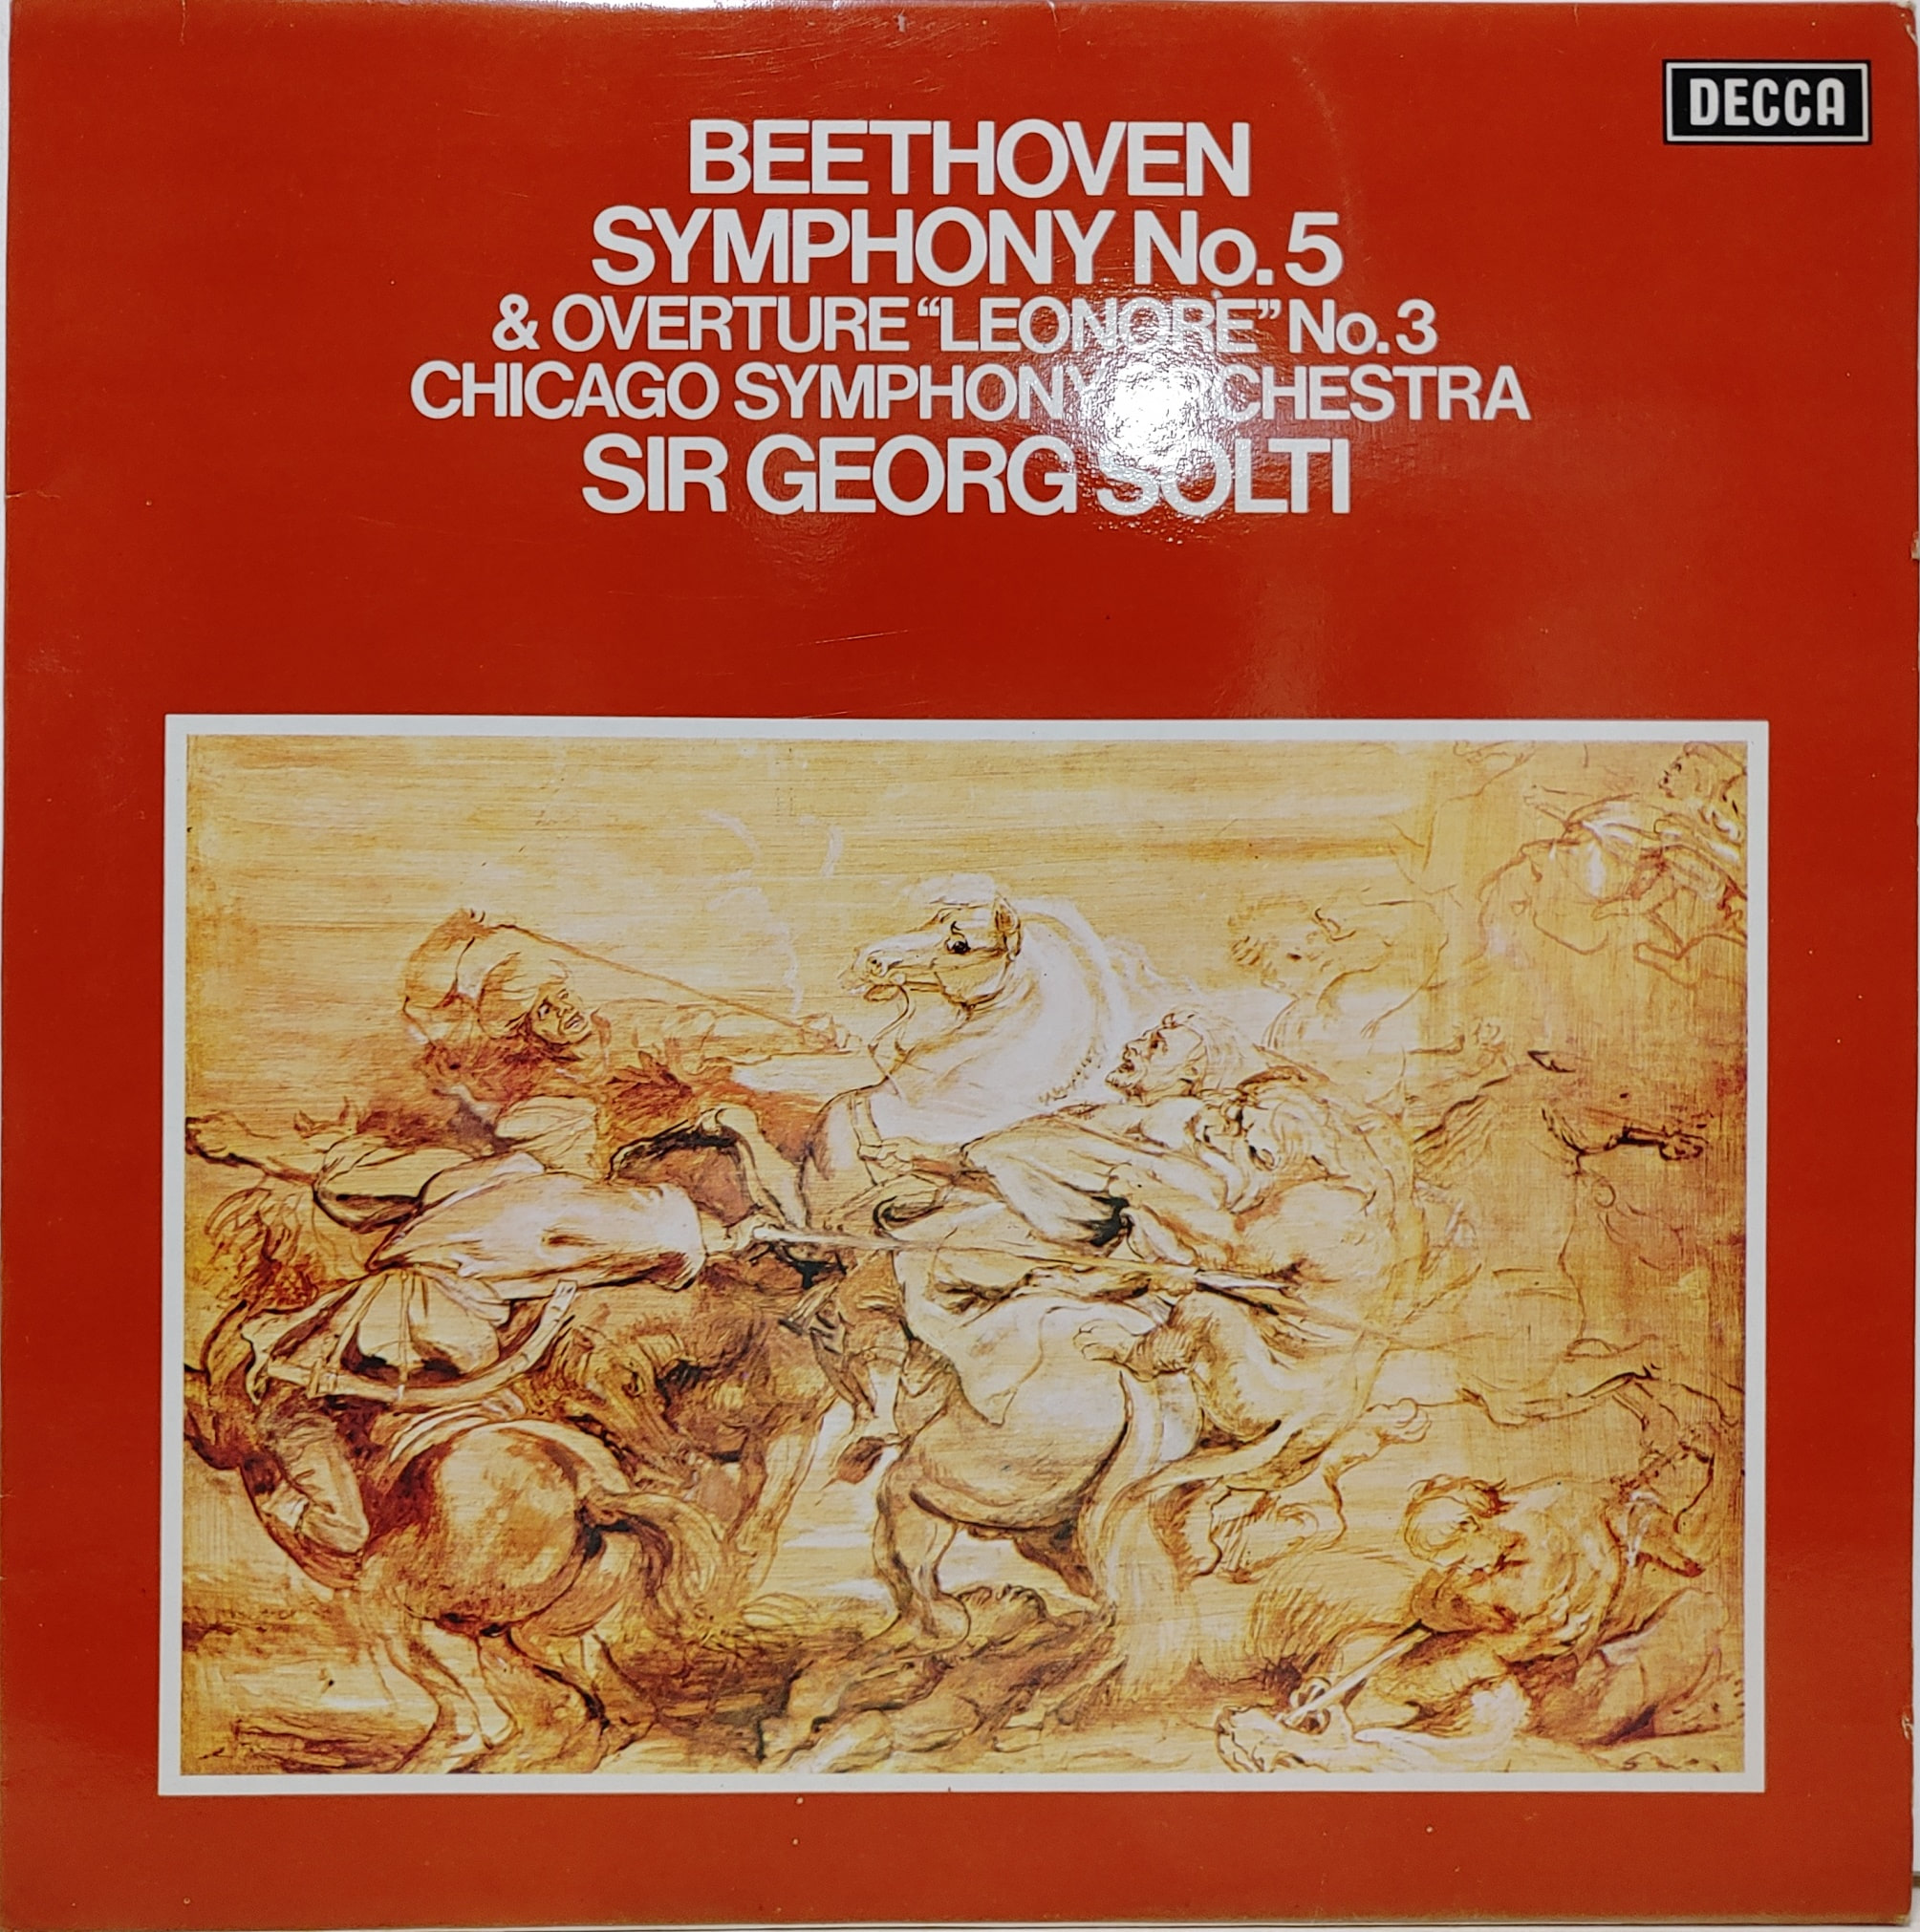 Beethoven / Symphony No.5, Leonore No.3 Overture Georg Solti